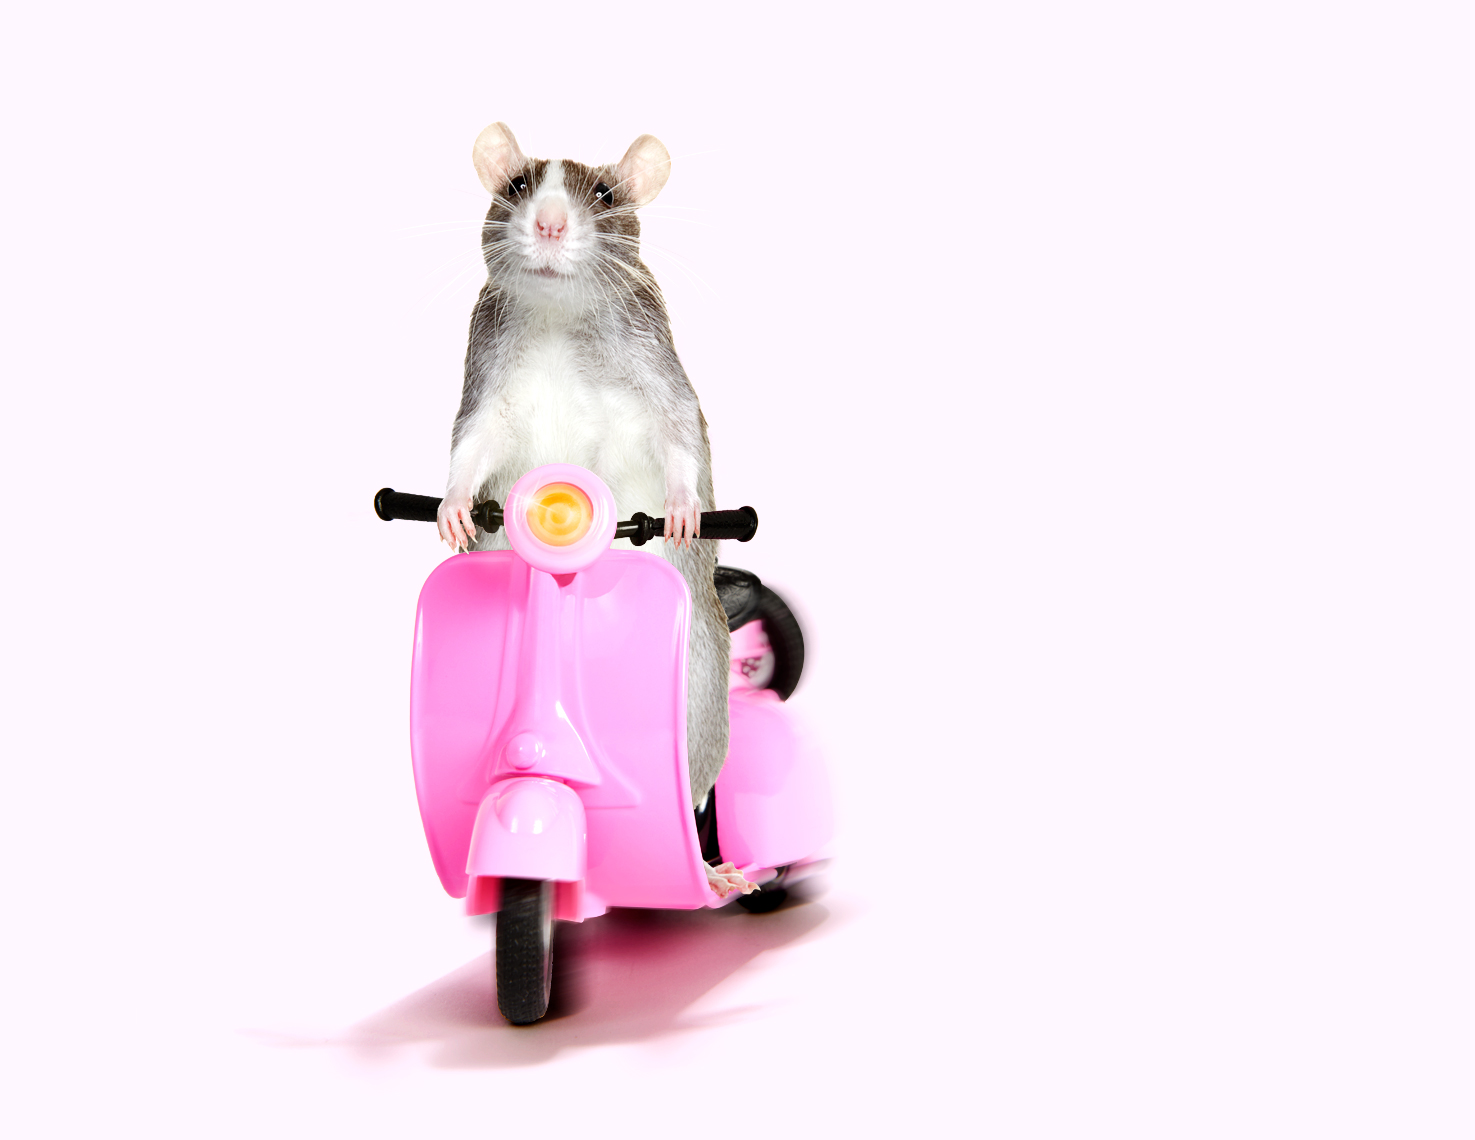 Rat on scooter